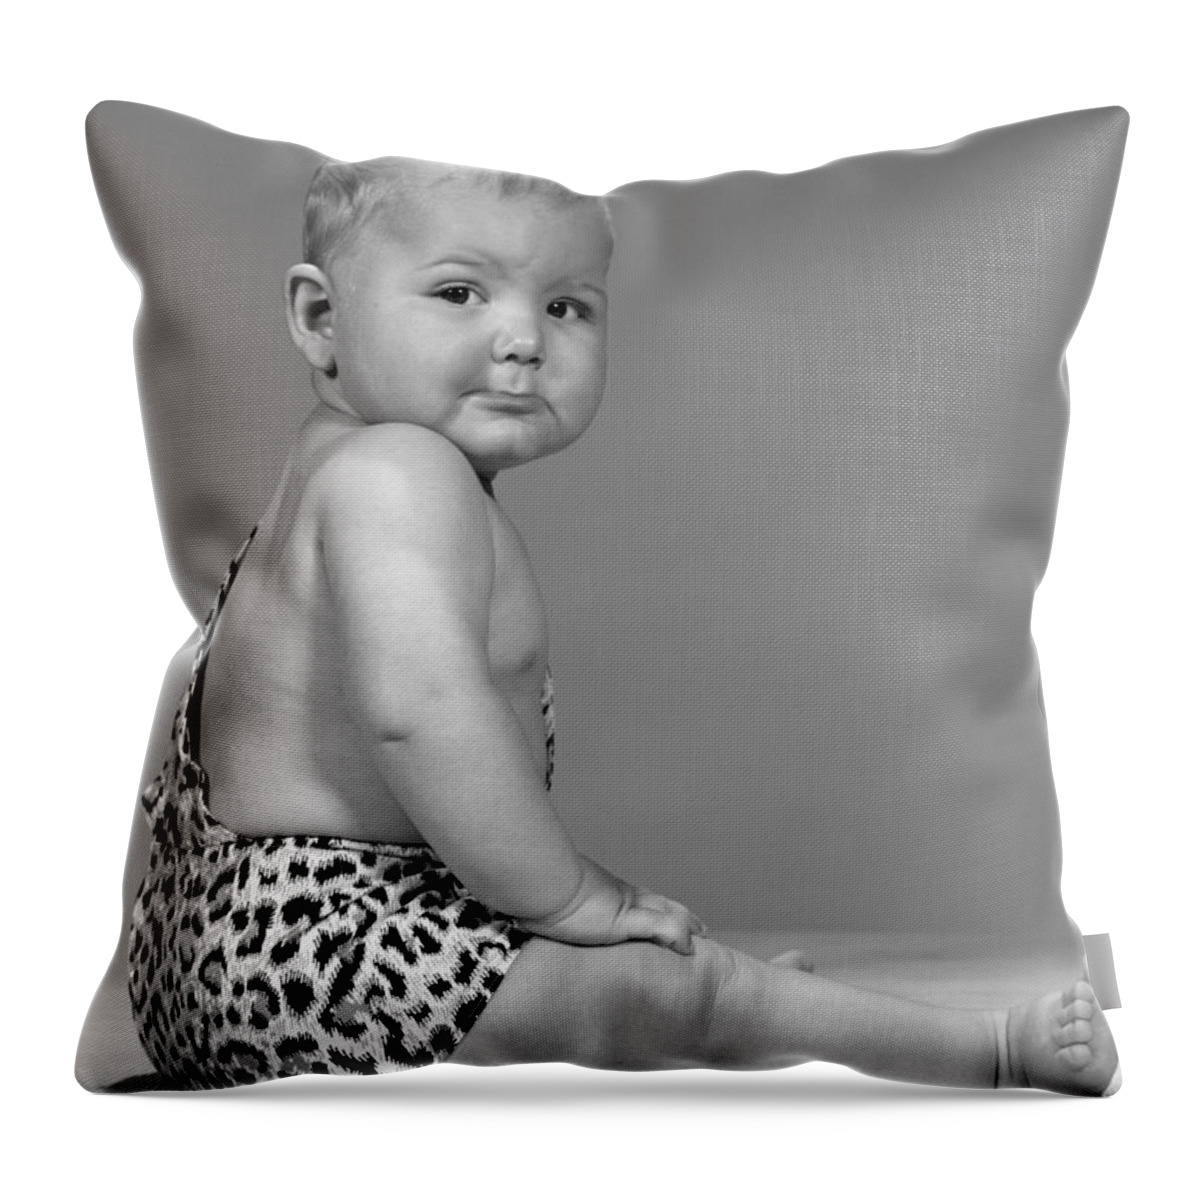 1960s Throw Pillow featuring the photograph Baby With Grumpy Look, C.1960s by H. Armstrong Roberts/ClassicStock